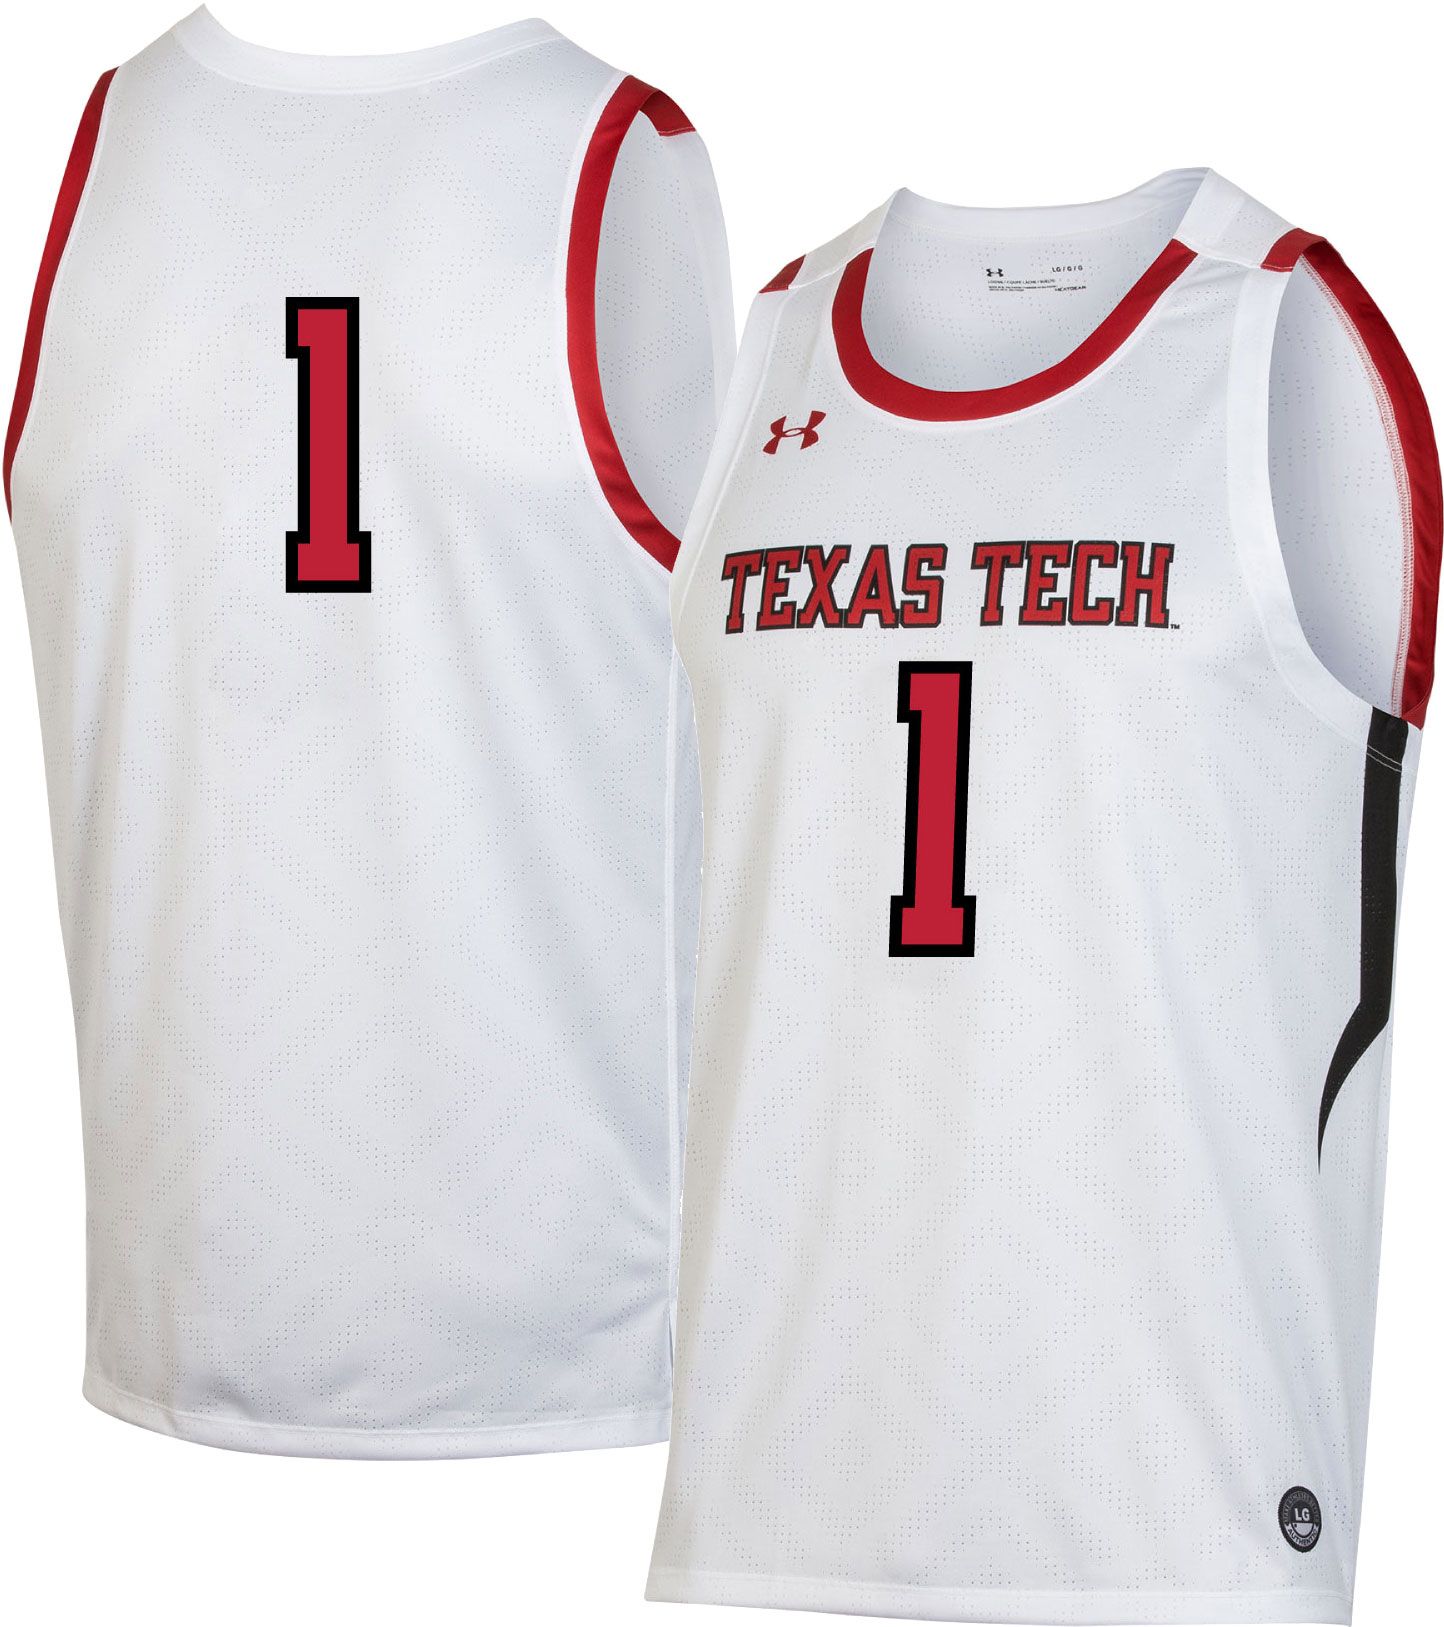 white and red jersey basketball